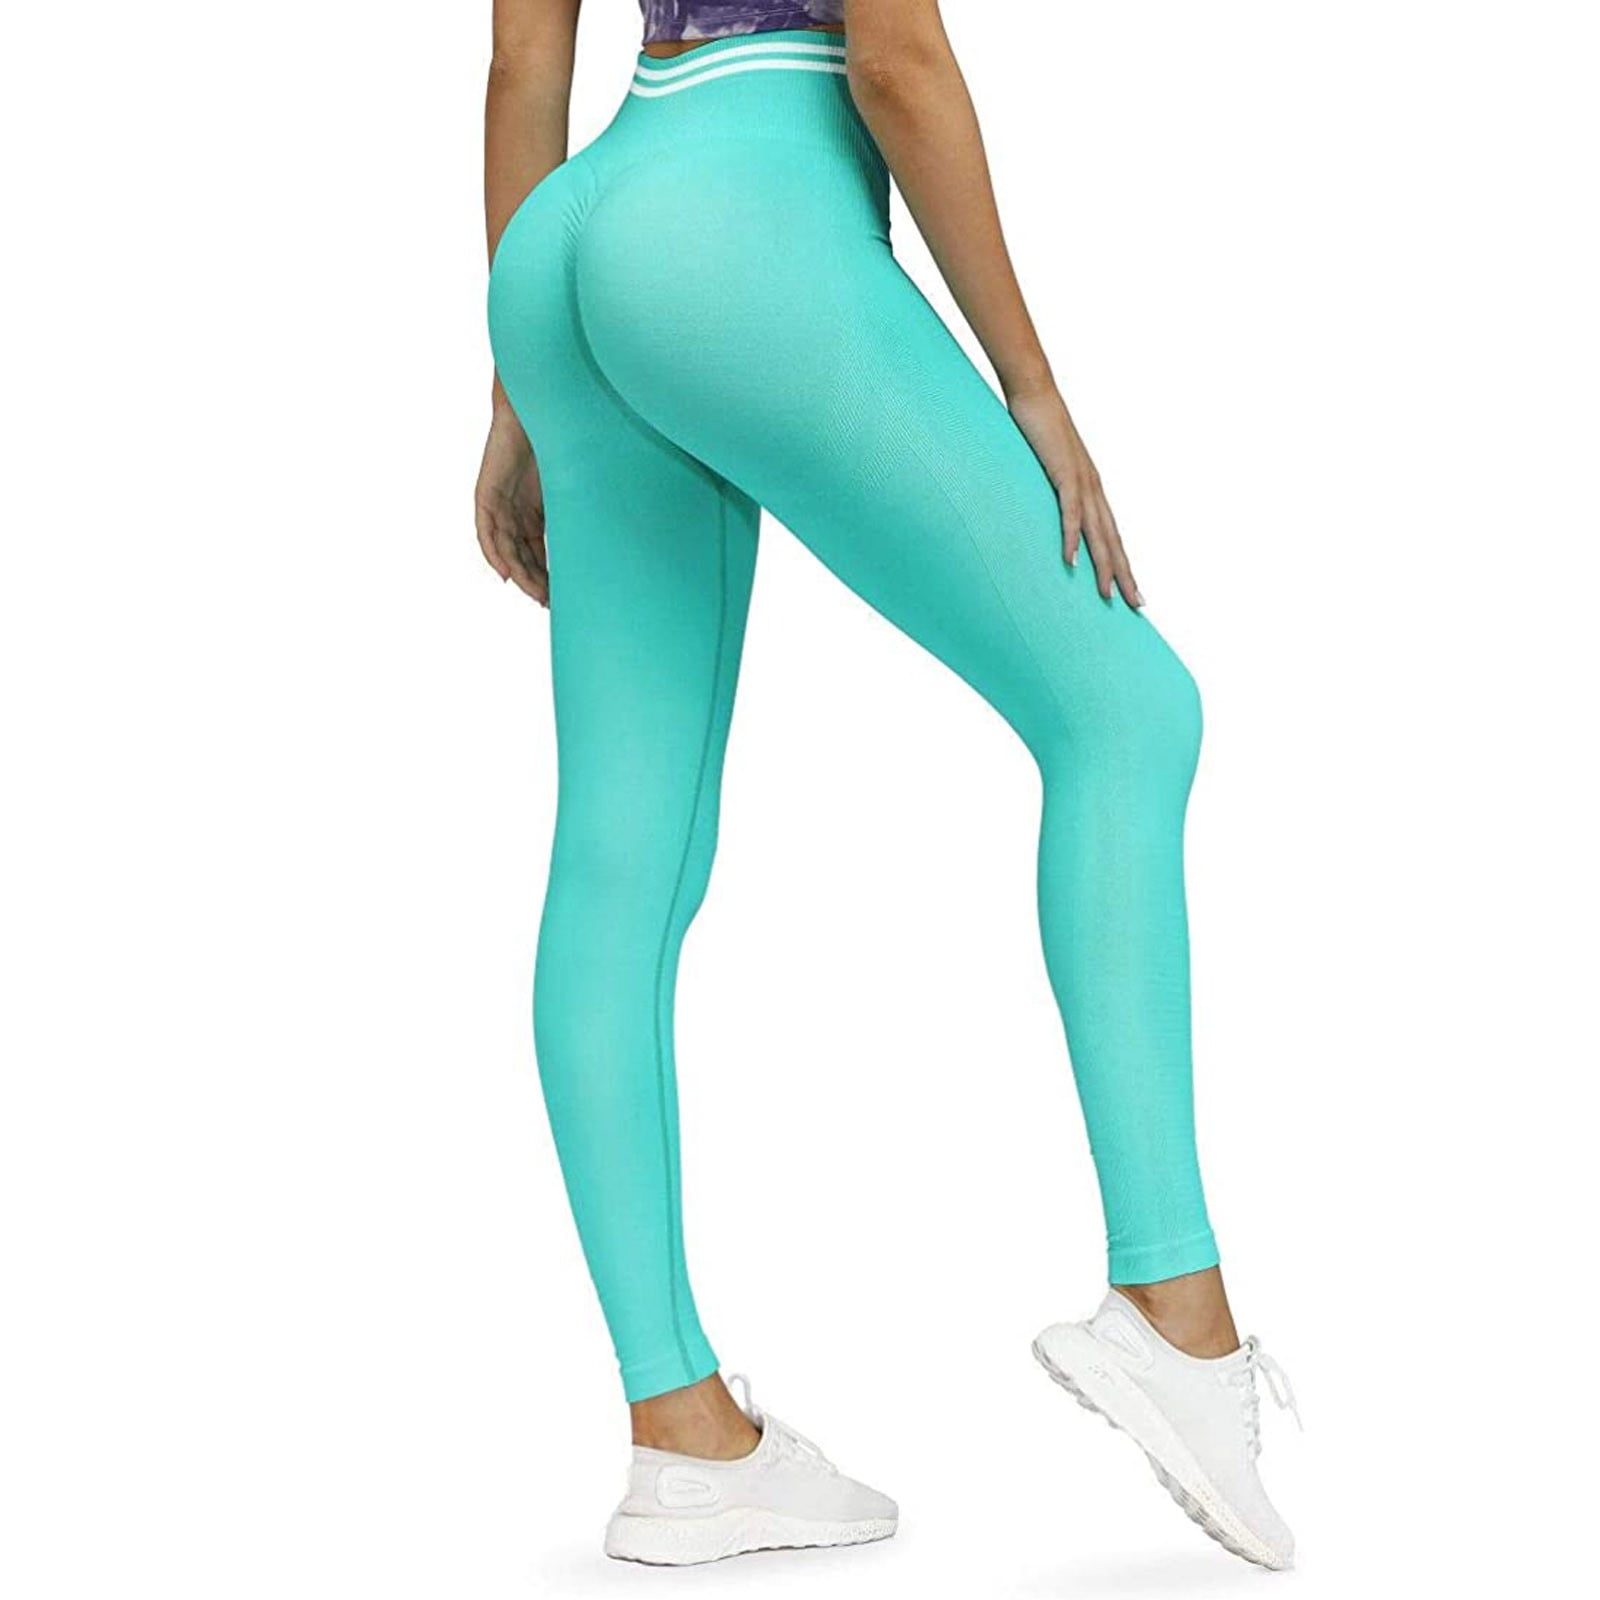 Efsteb Womens Leggings Fitness Booty Lift Pant Tummy Control Athletic Solid  Workout Leggings Sports Running Yoga Athletic Pants Green M